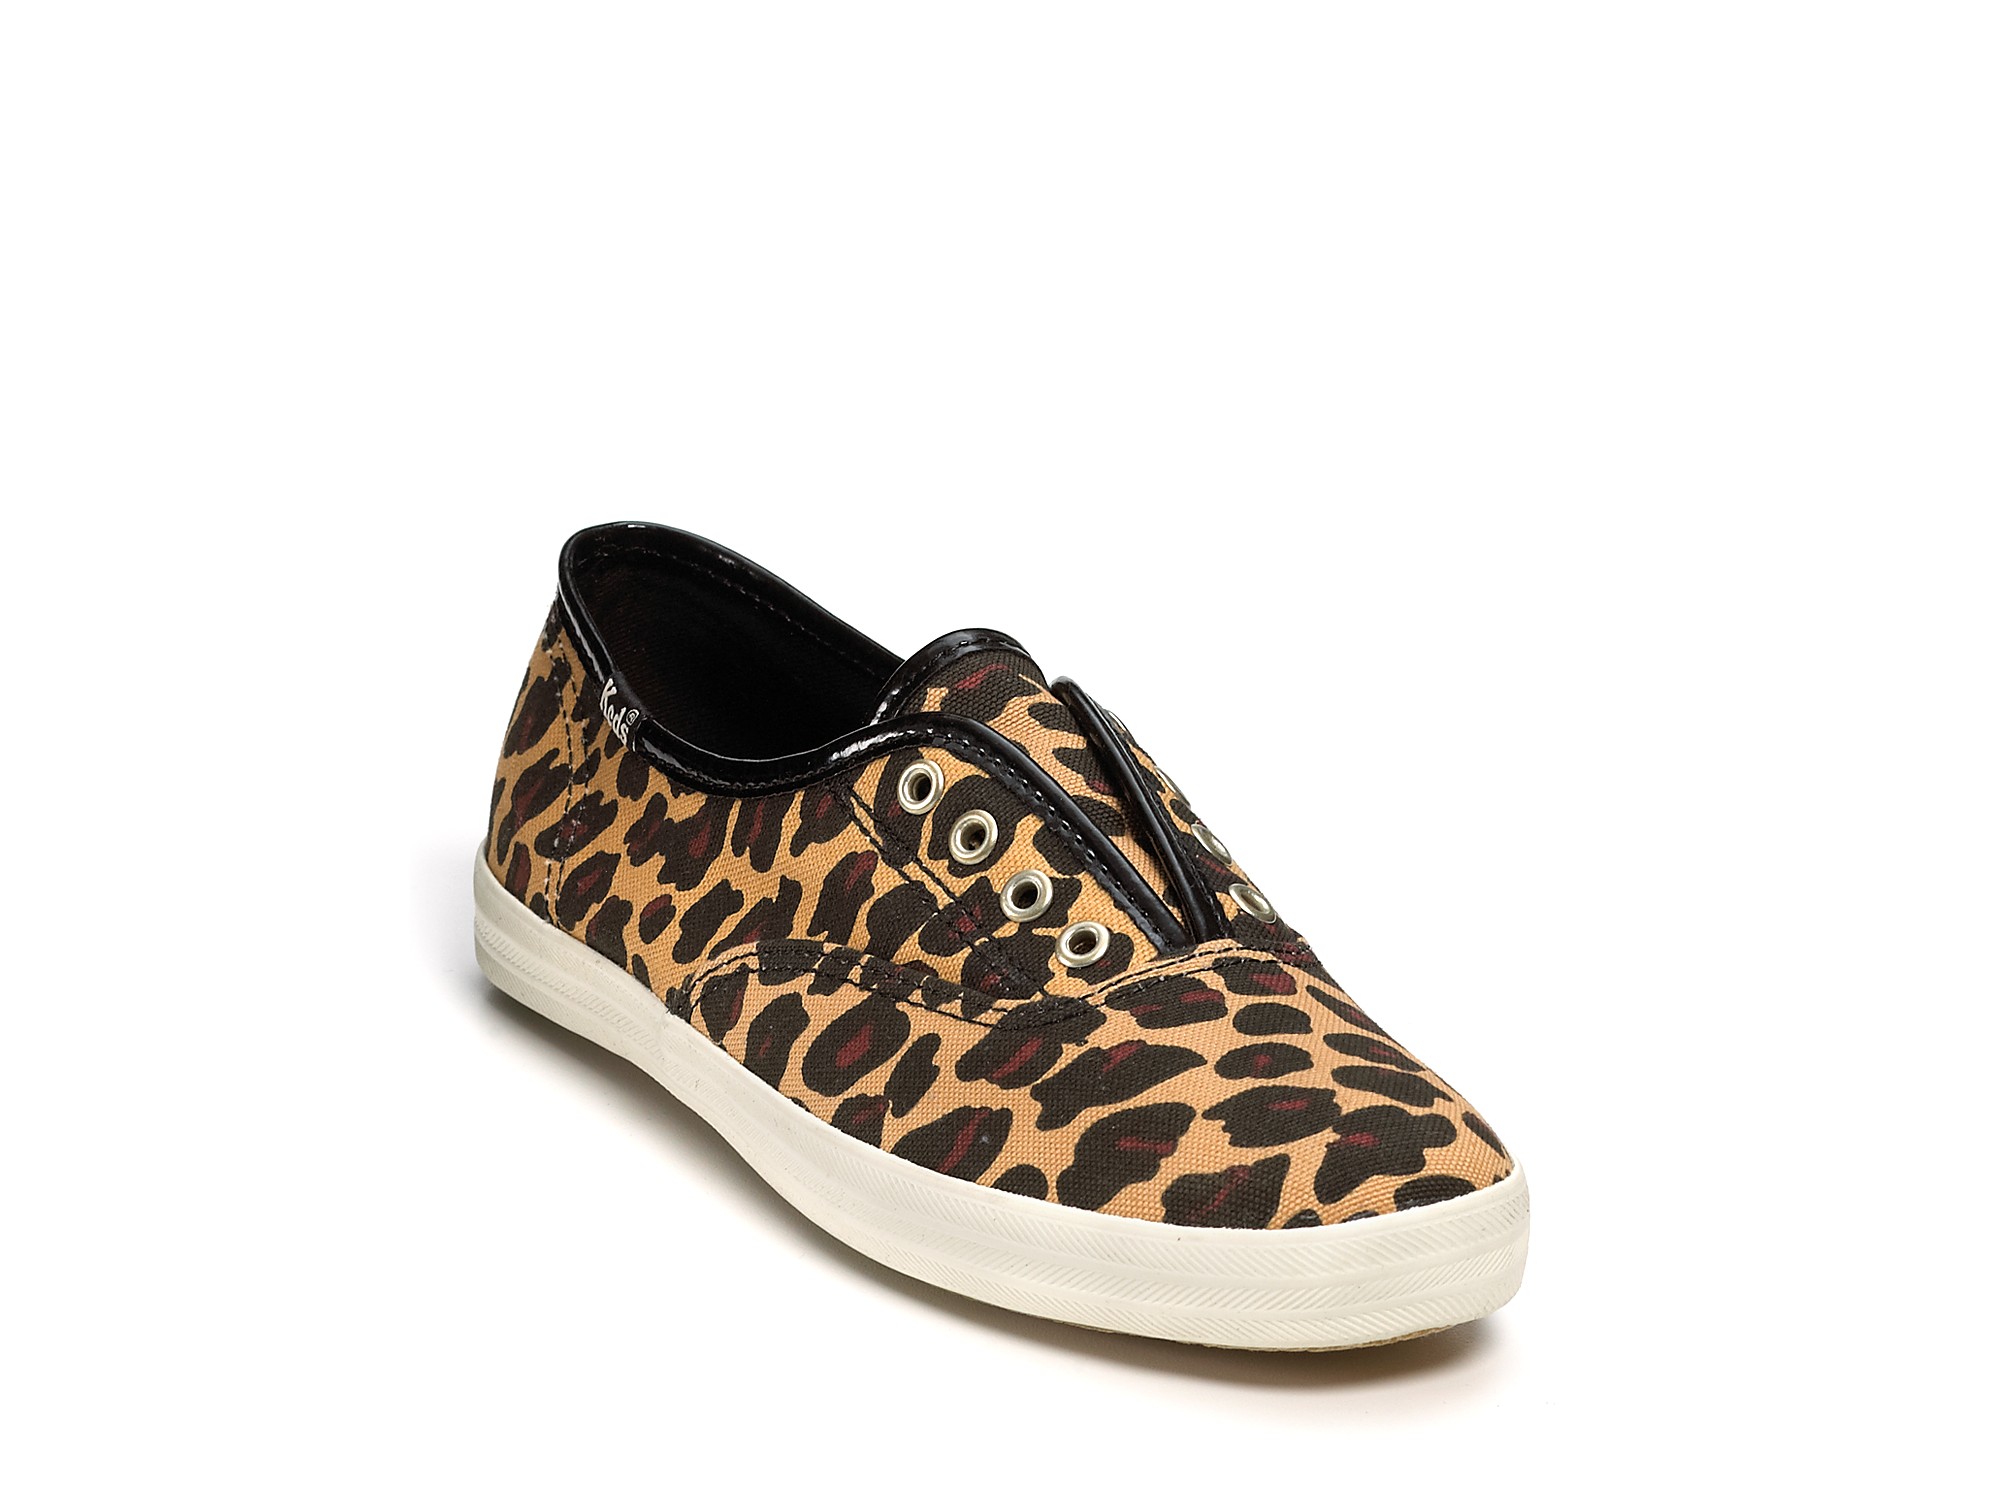 Keds Champion Animal Laceless Sneakers in Animal (leopard) | Lyst